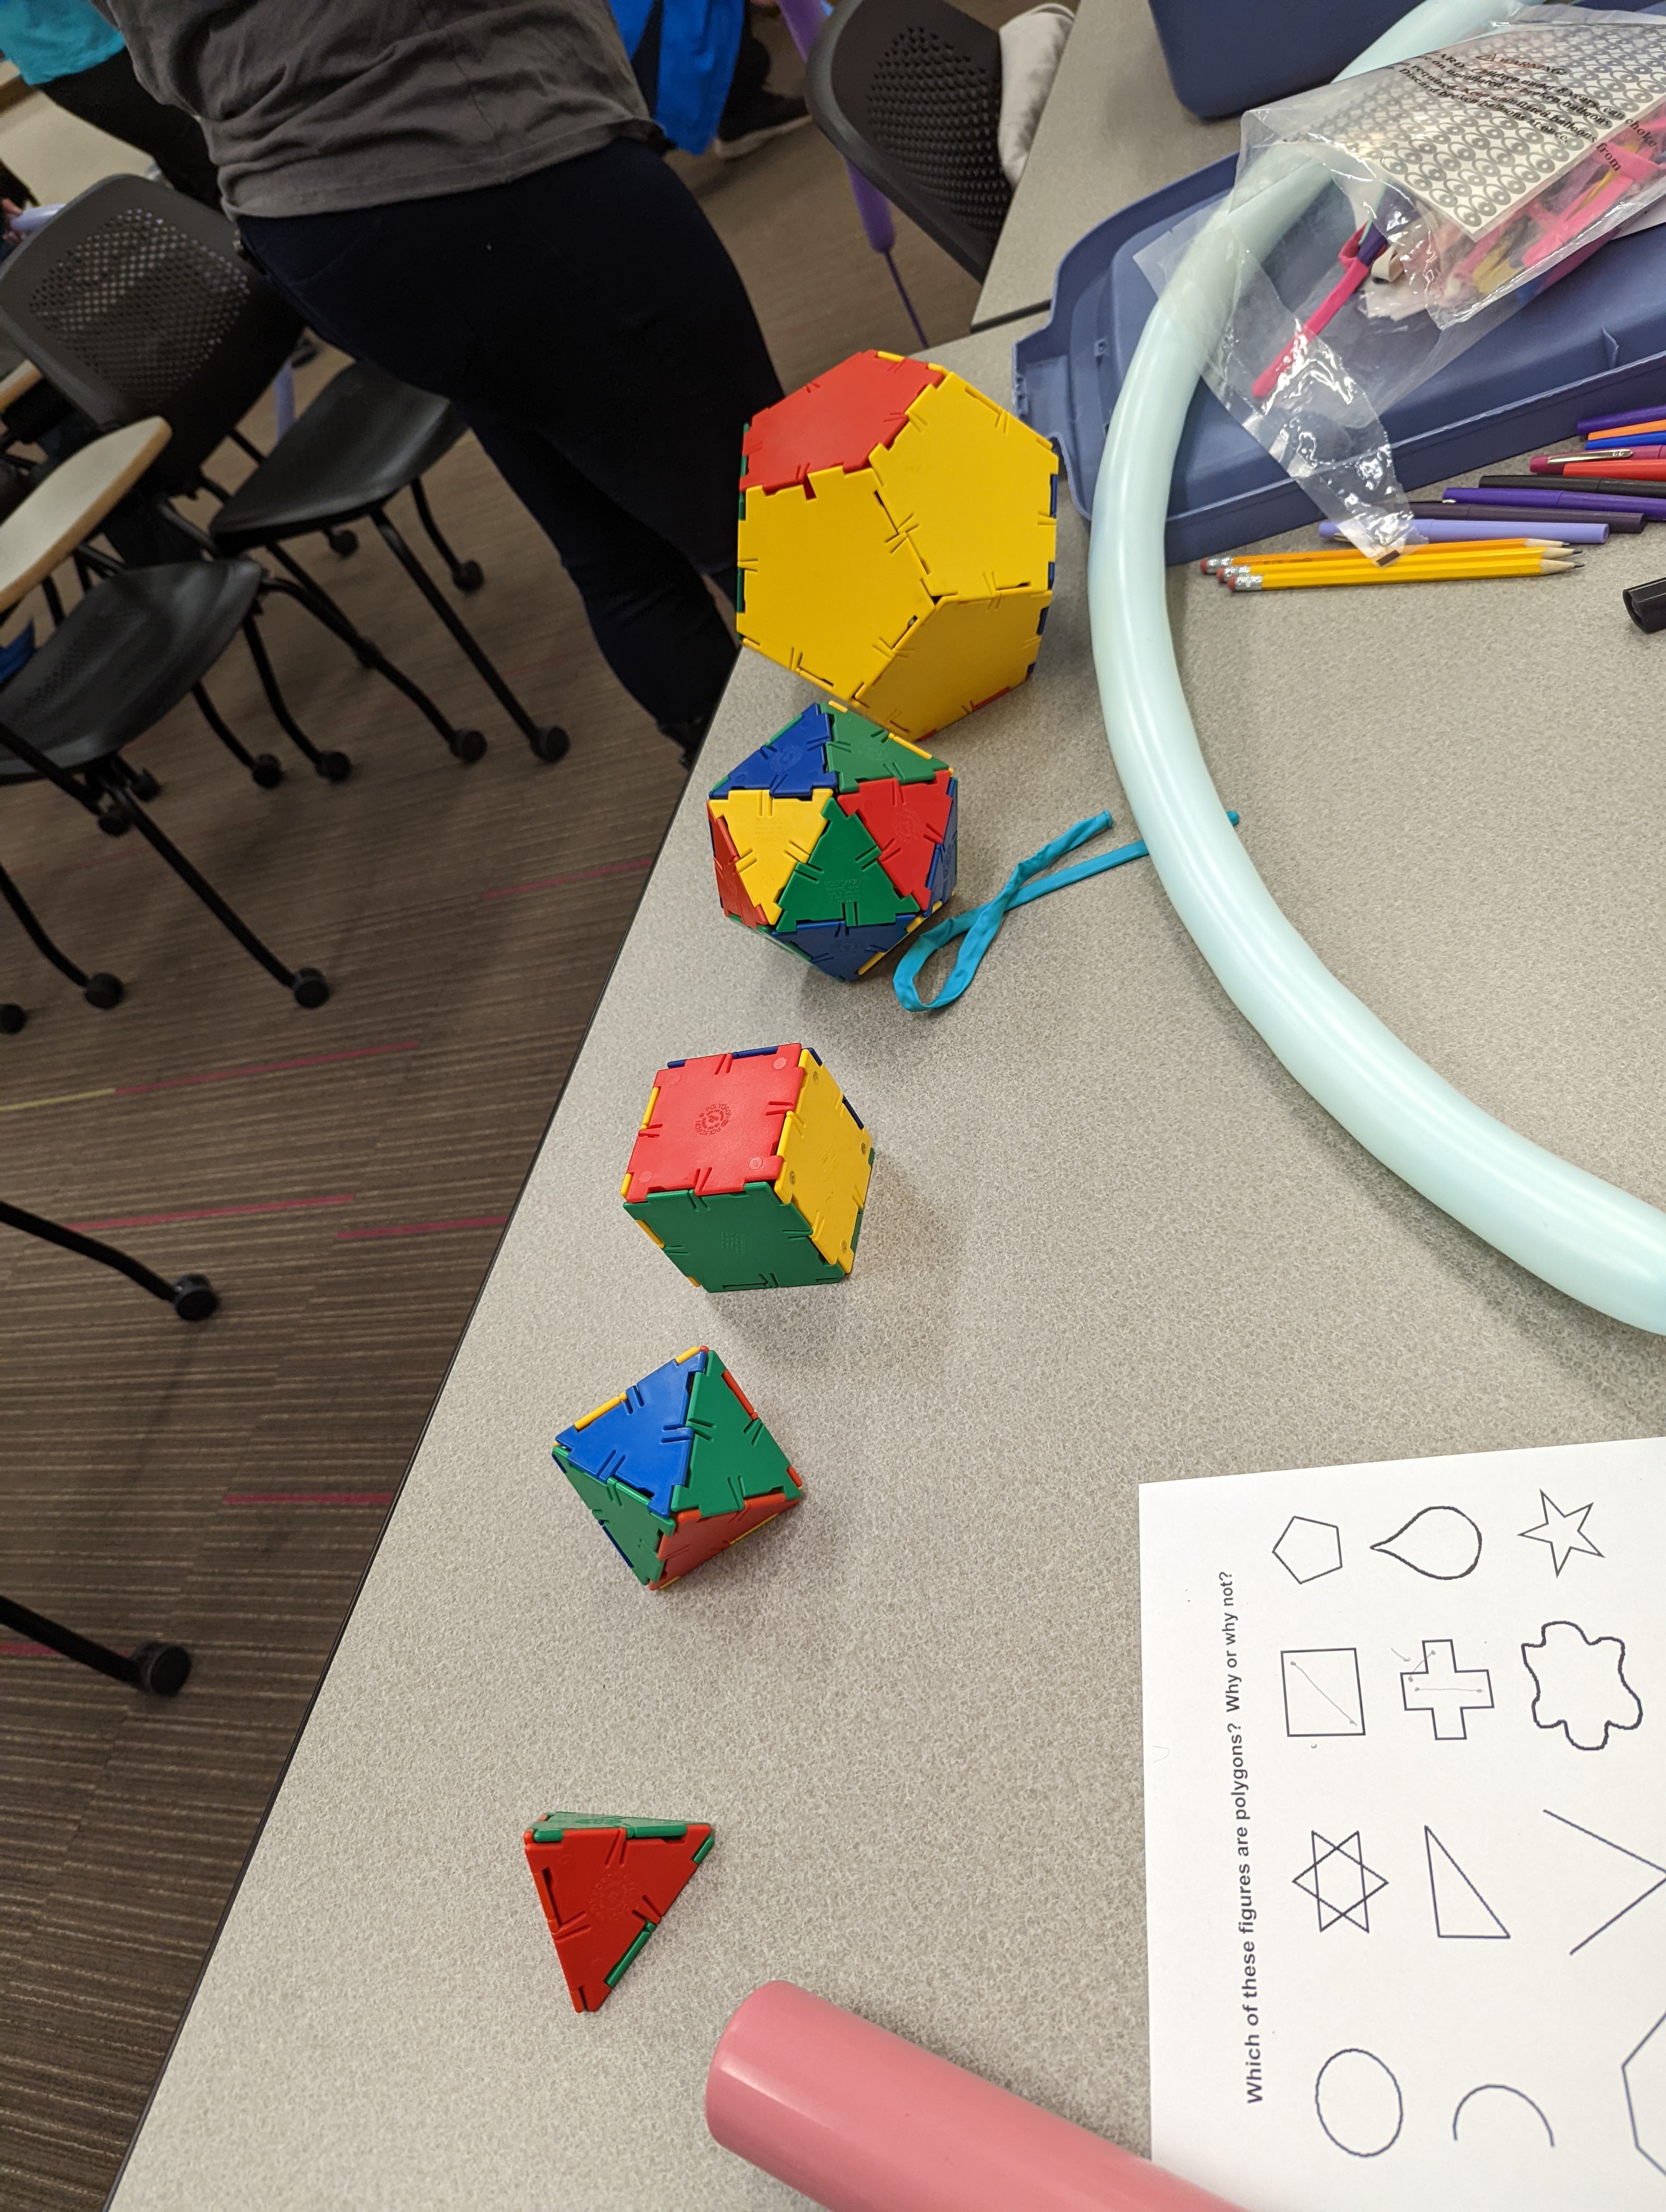 The five platonic solids, assembled using plastic tiles called polydrons